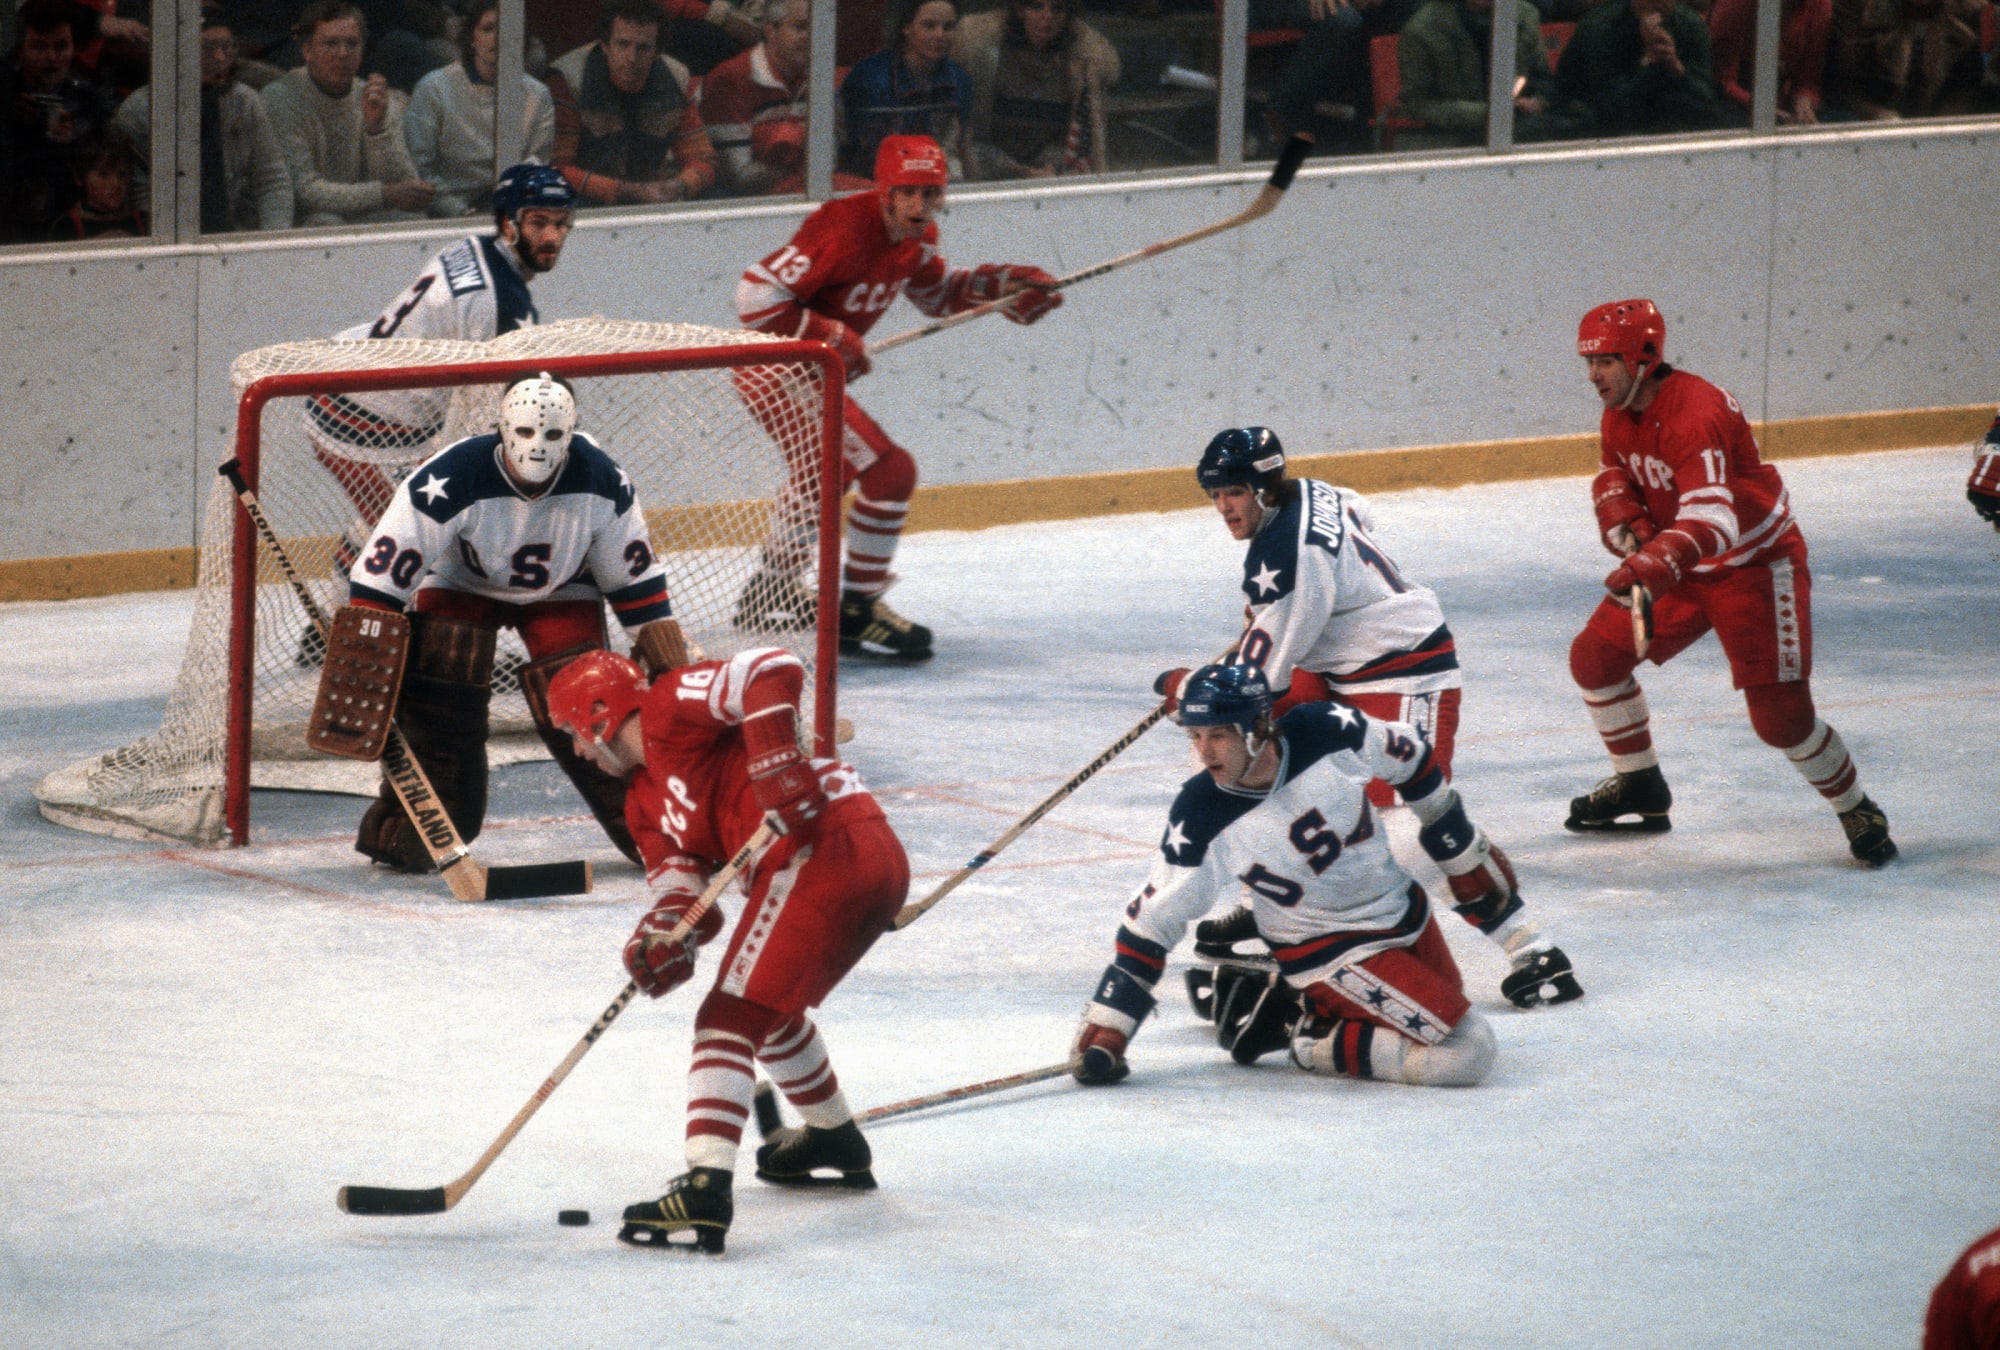 The New York Rangers and their connection to the Miracle on Ice